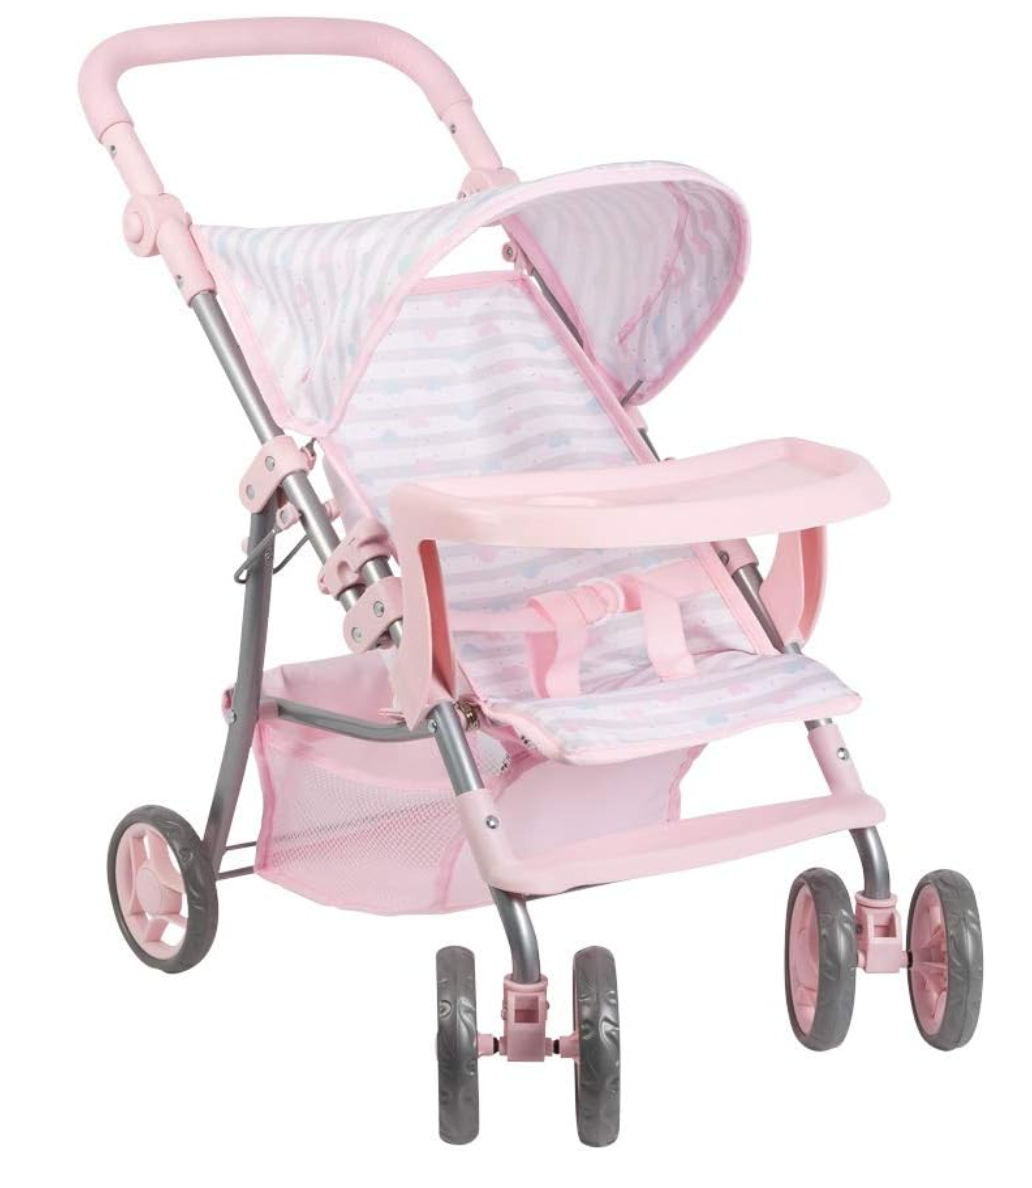 Snack N Go Baby Doll Stroller with Shade